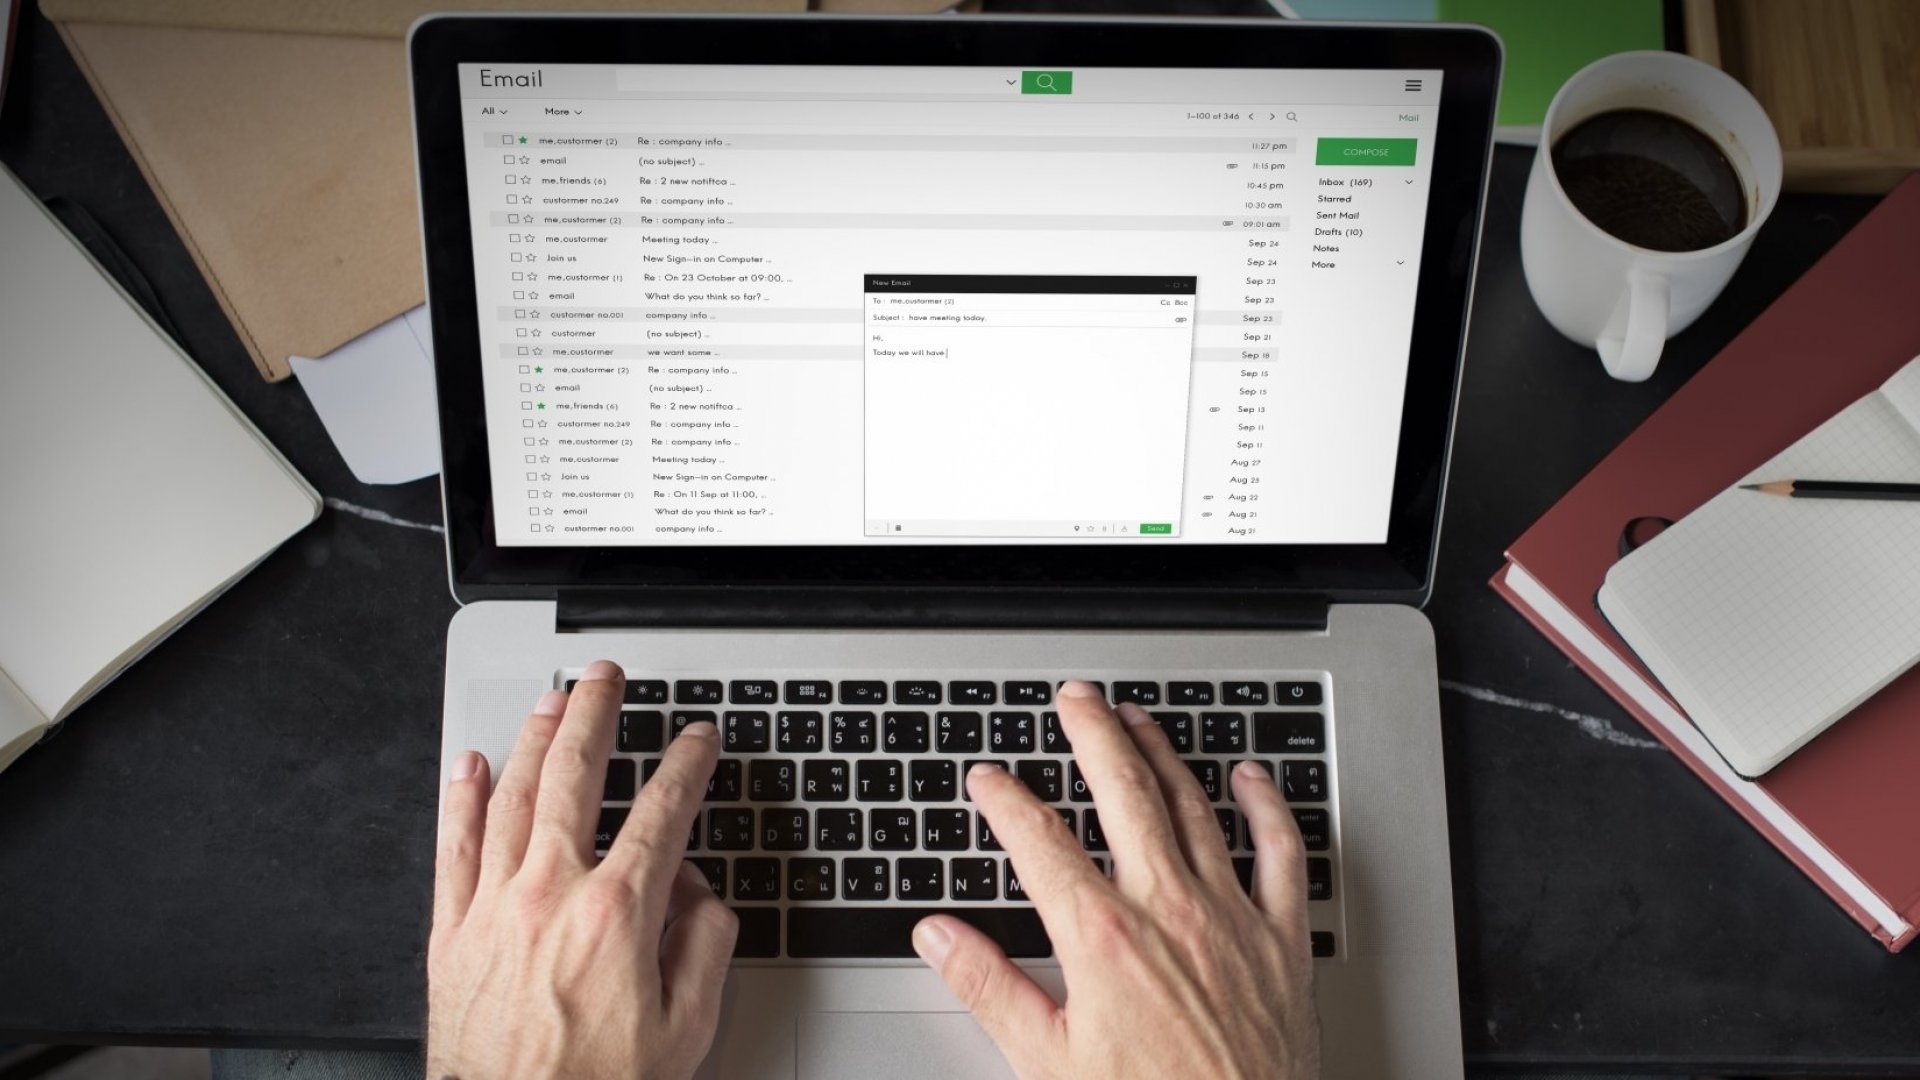 The Best Way to Organize Your Email: The Guide to Safety!